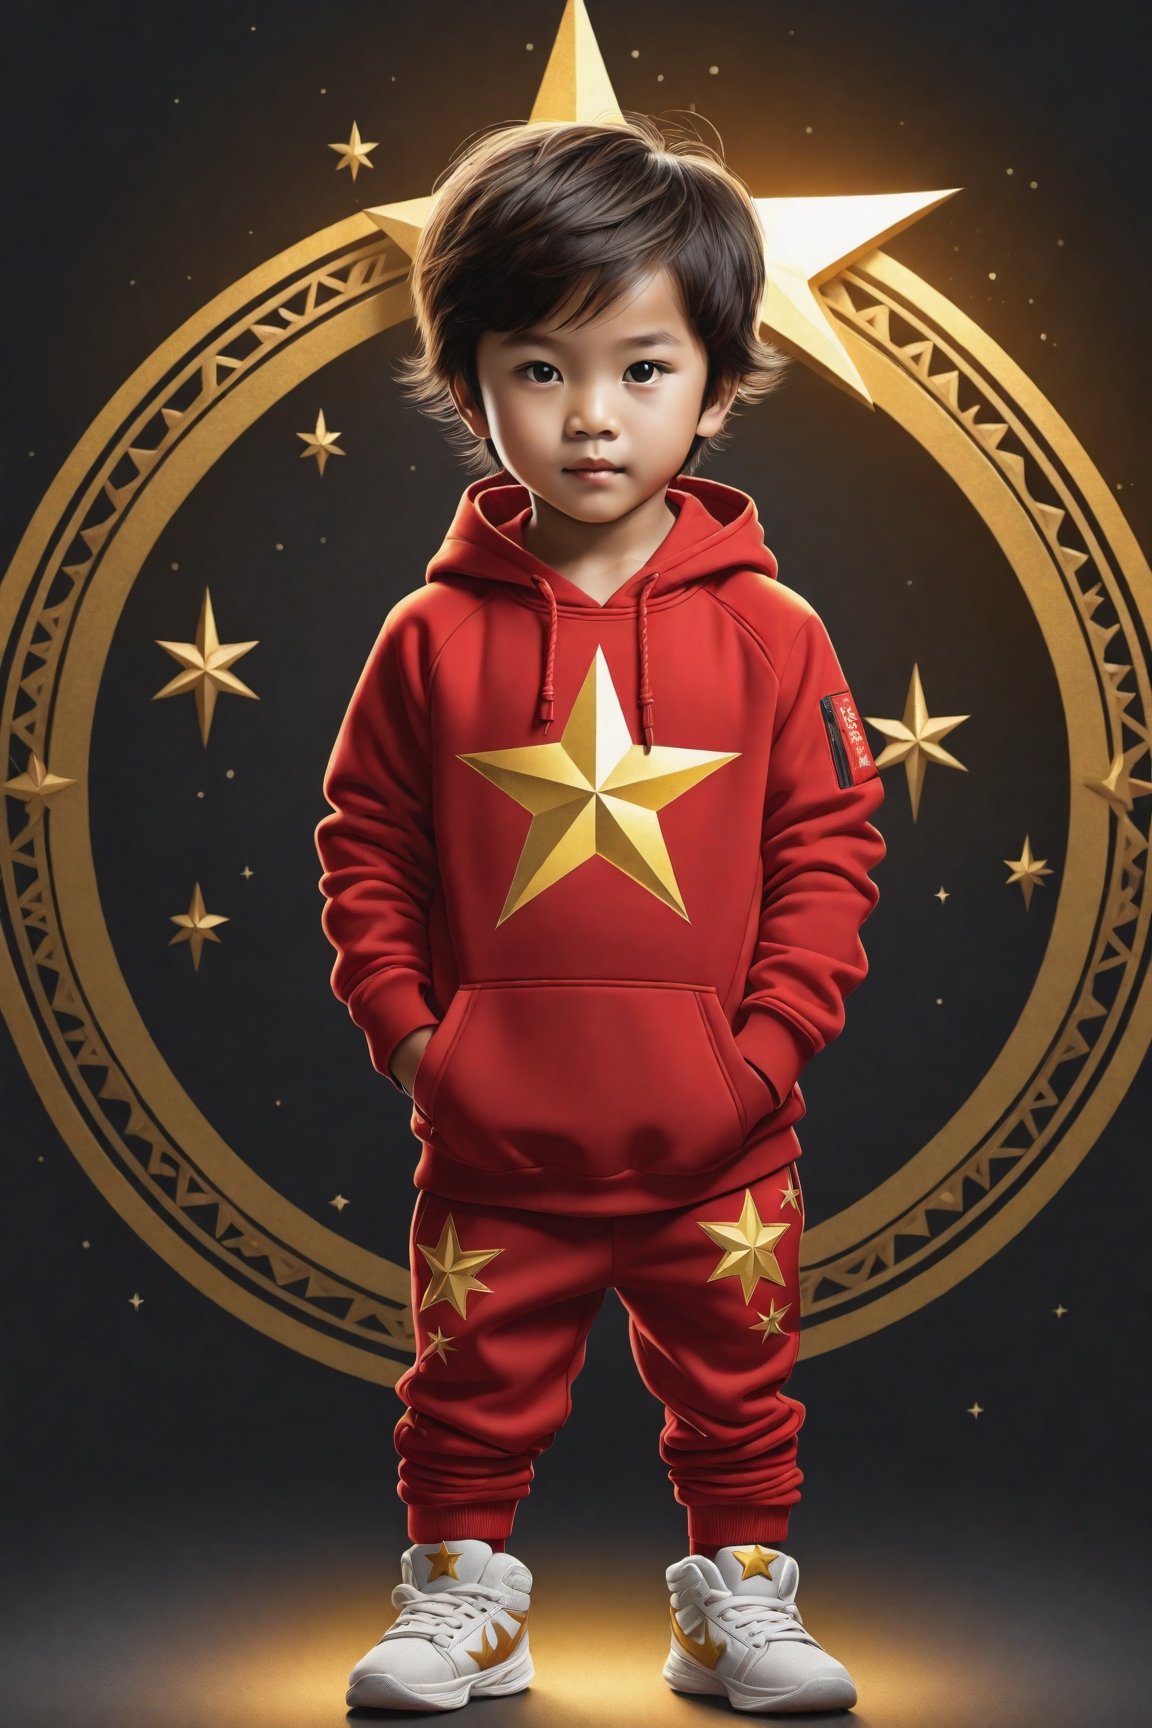 ((full body)) body_marking, highly detailed shot tribal version character of cute Vietnamese boy kid in Red mix Yellow winter sport outfit has a big golden star, masterpiece artwork, white accent, detailed face features, subtle gradients, extremely detailed, photorealistic, 8k, centered, perfect symmetrical, studio photography, muted color scheme, made with adobe illustrator, solid dark background 